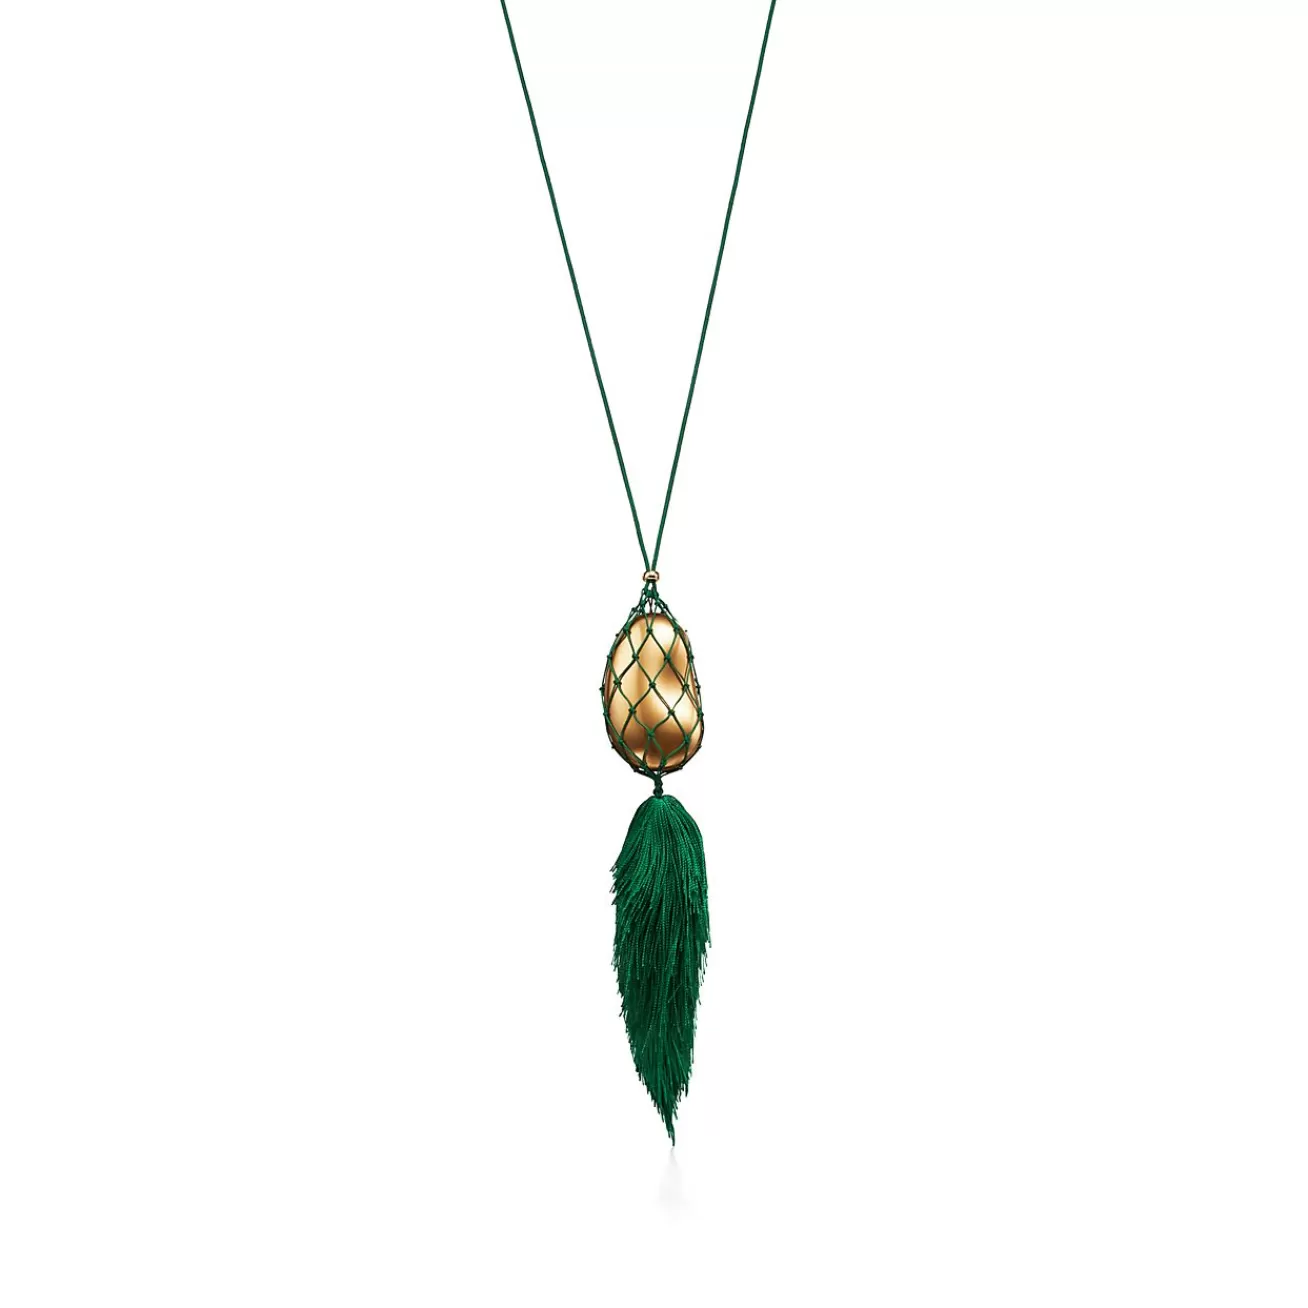 Tiffany & Co. Elsa Peretti® Bean® design Necklace of Gold Lacquer over Japanese Hardwood | ^ Necklaces & Pendants | Gold Jewelry